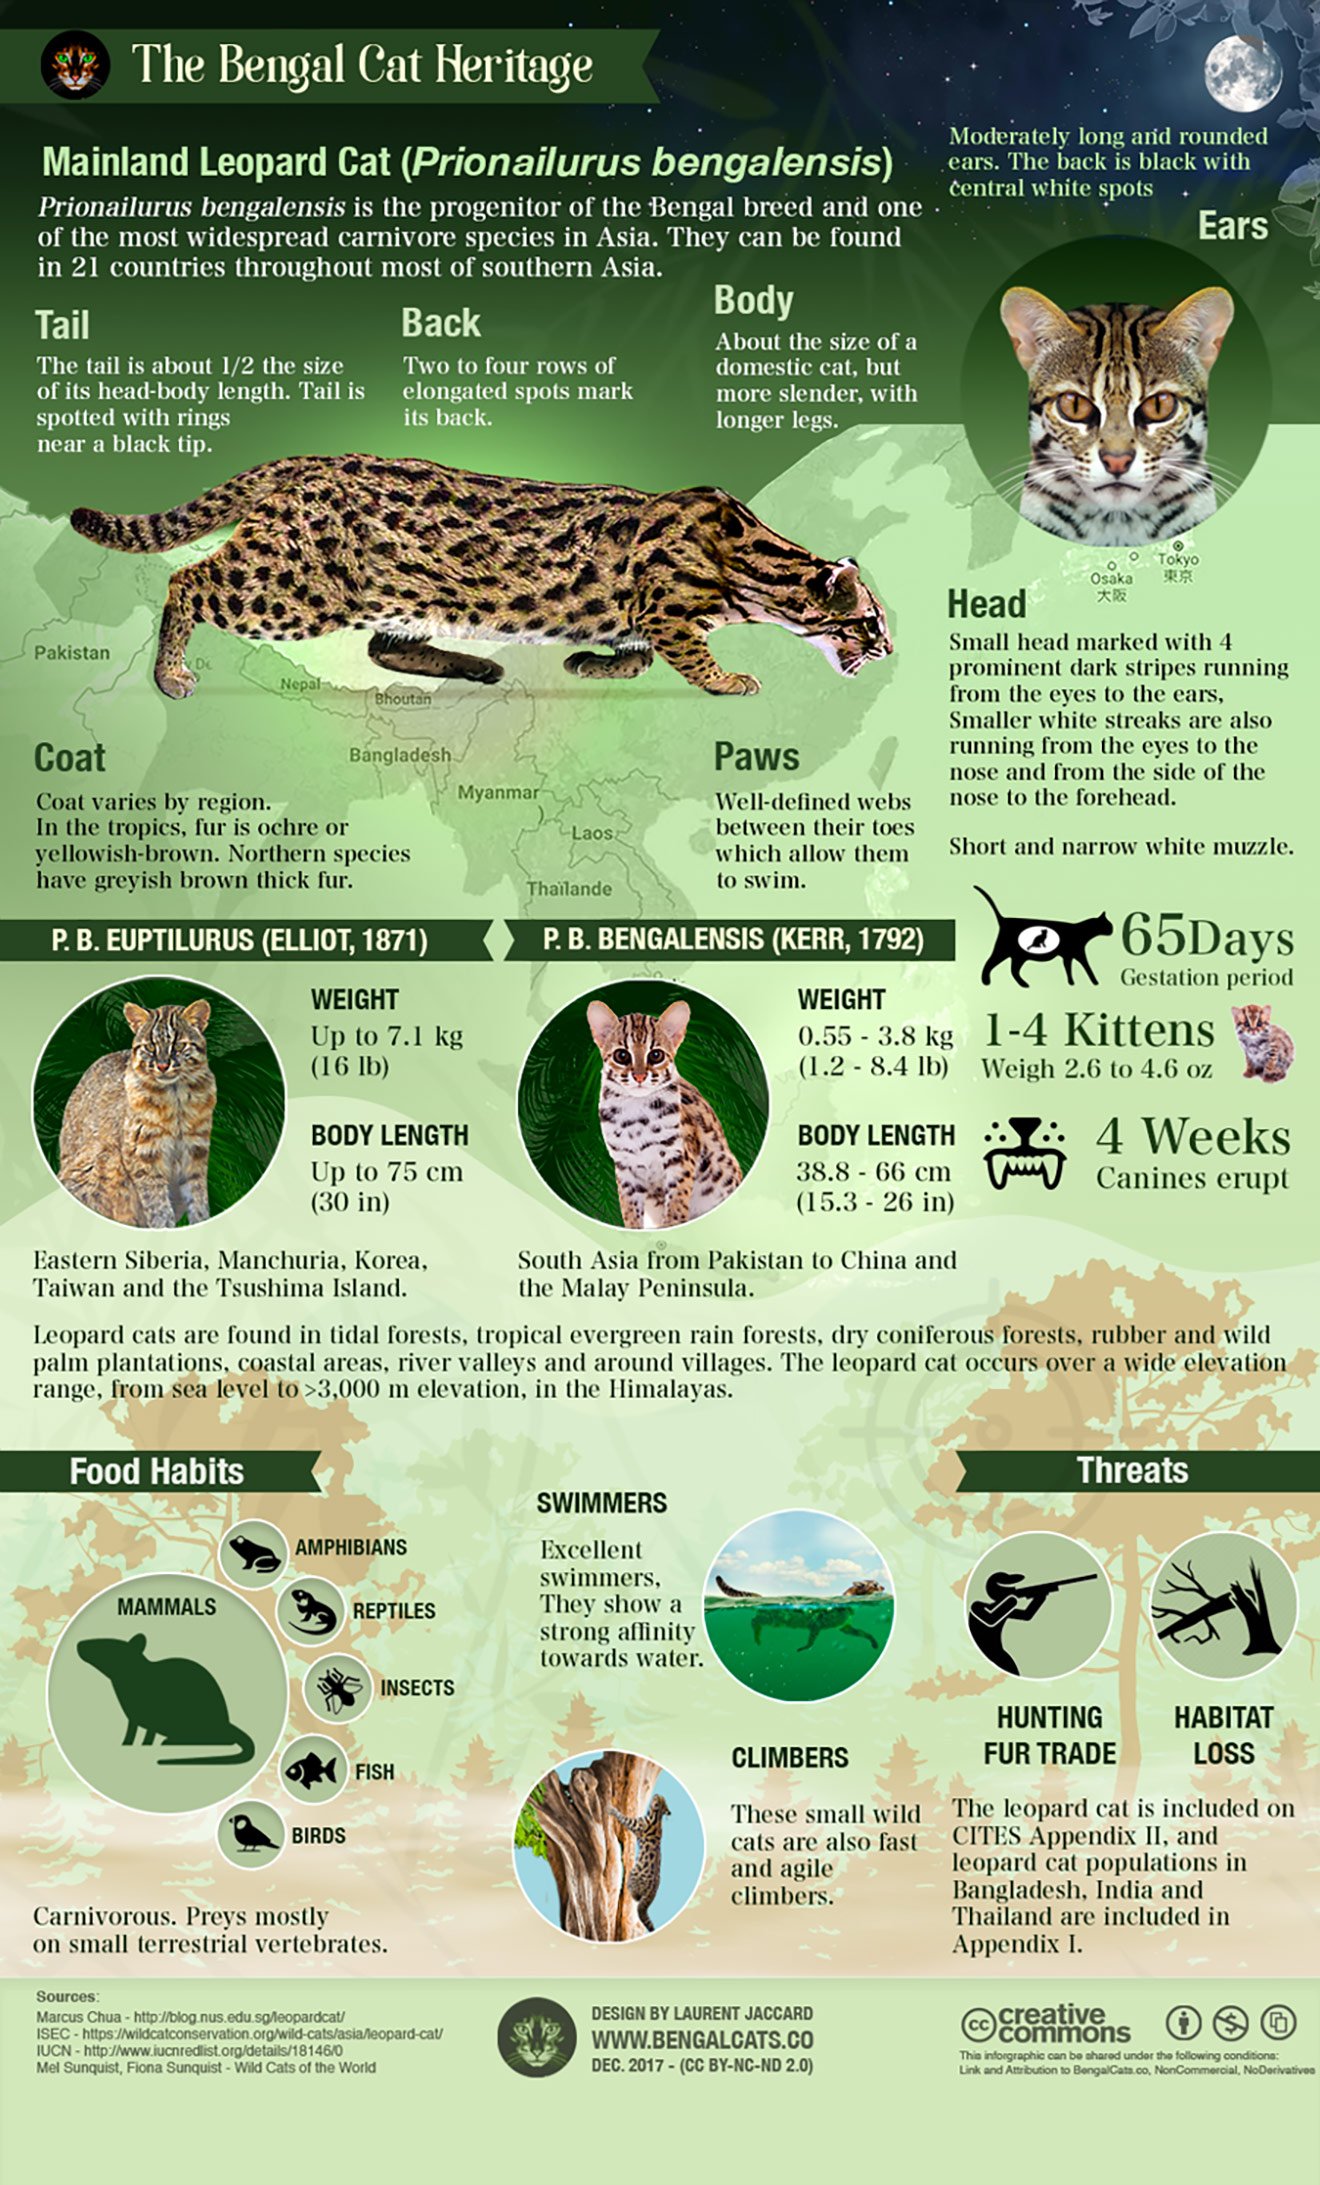 Infographic about the Asian Leopard cat (Prionailurus bengalensis)